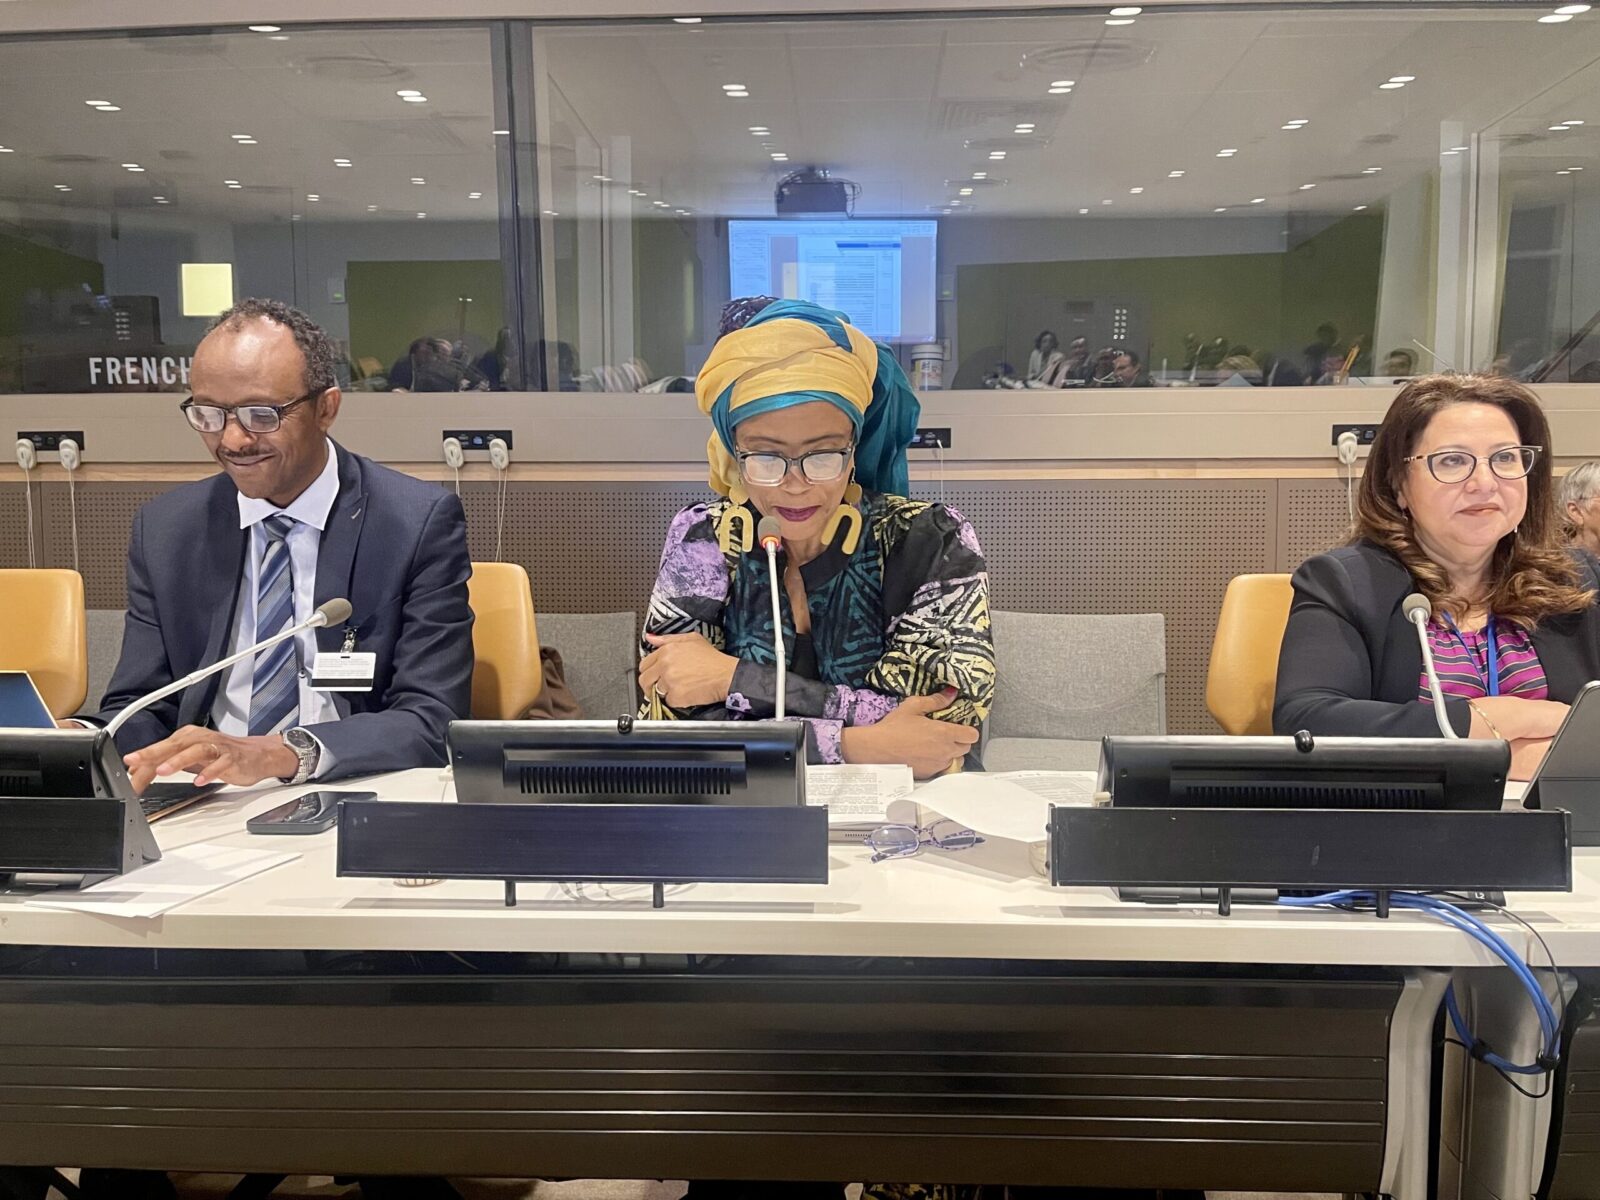 H.E. Dr Eng Habtamu Itefa, Minister of Water and Energy, Federal Democratic Republic of Ethiopia, Ms Ahunna Eziakonwa, United Nations Assistant-Secretary General and UNDP Regional Director for Africa and Boutheina Guermazi, World Bank Group’s Director for Regional Integration in Africa